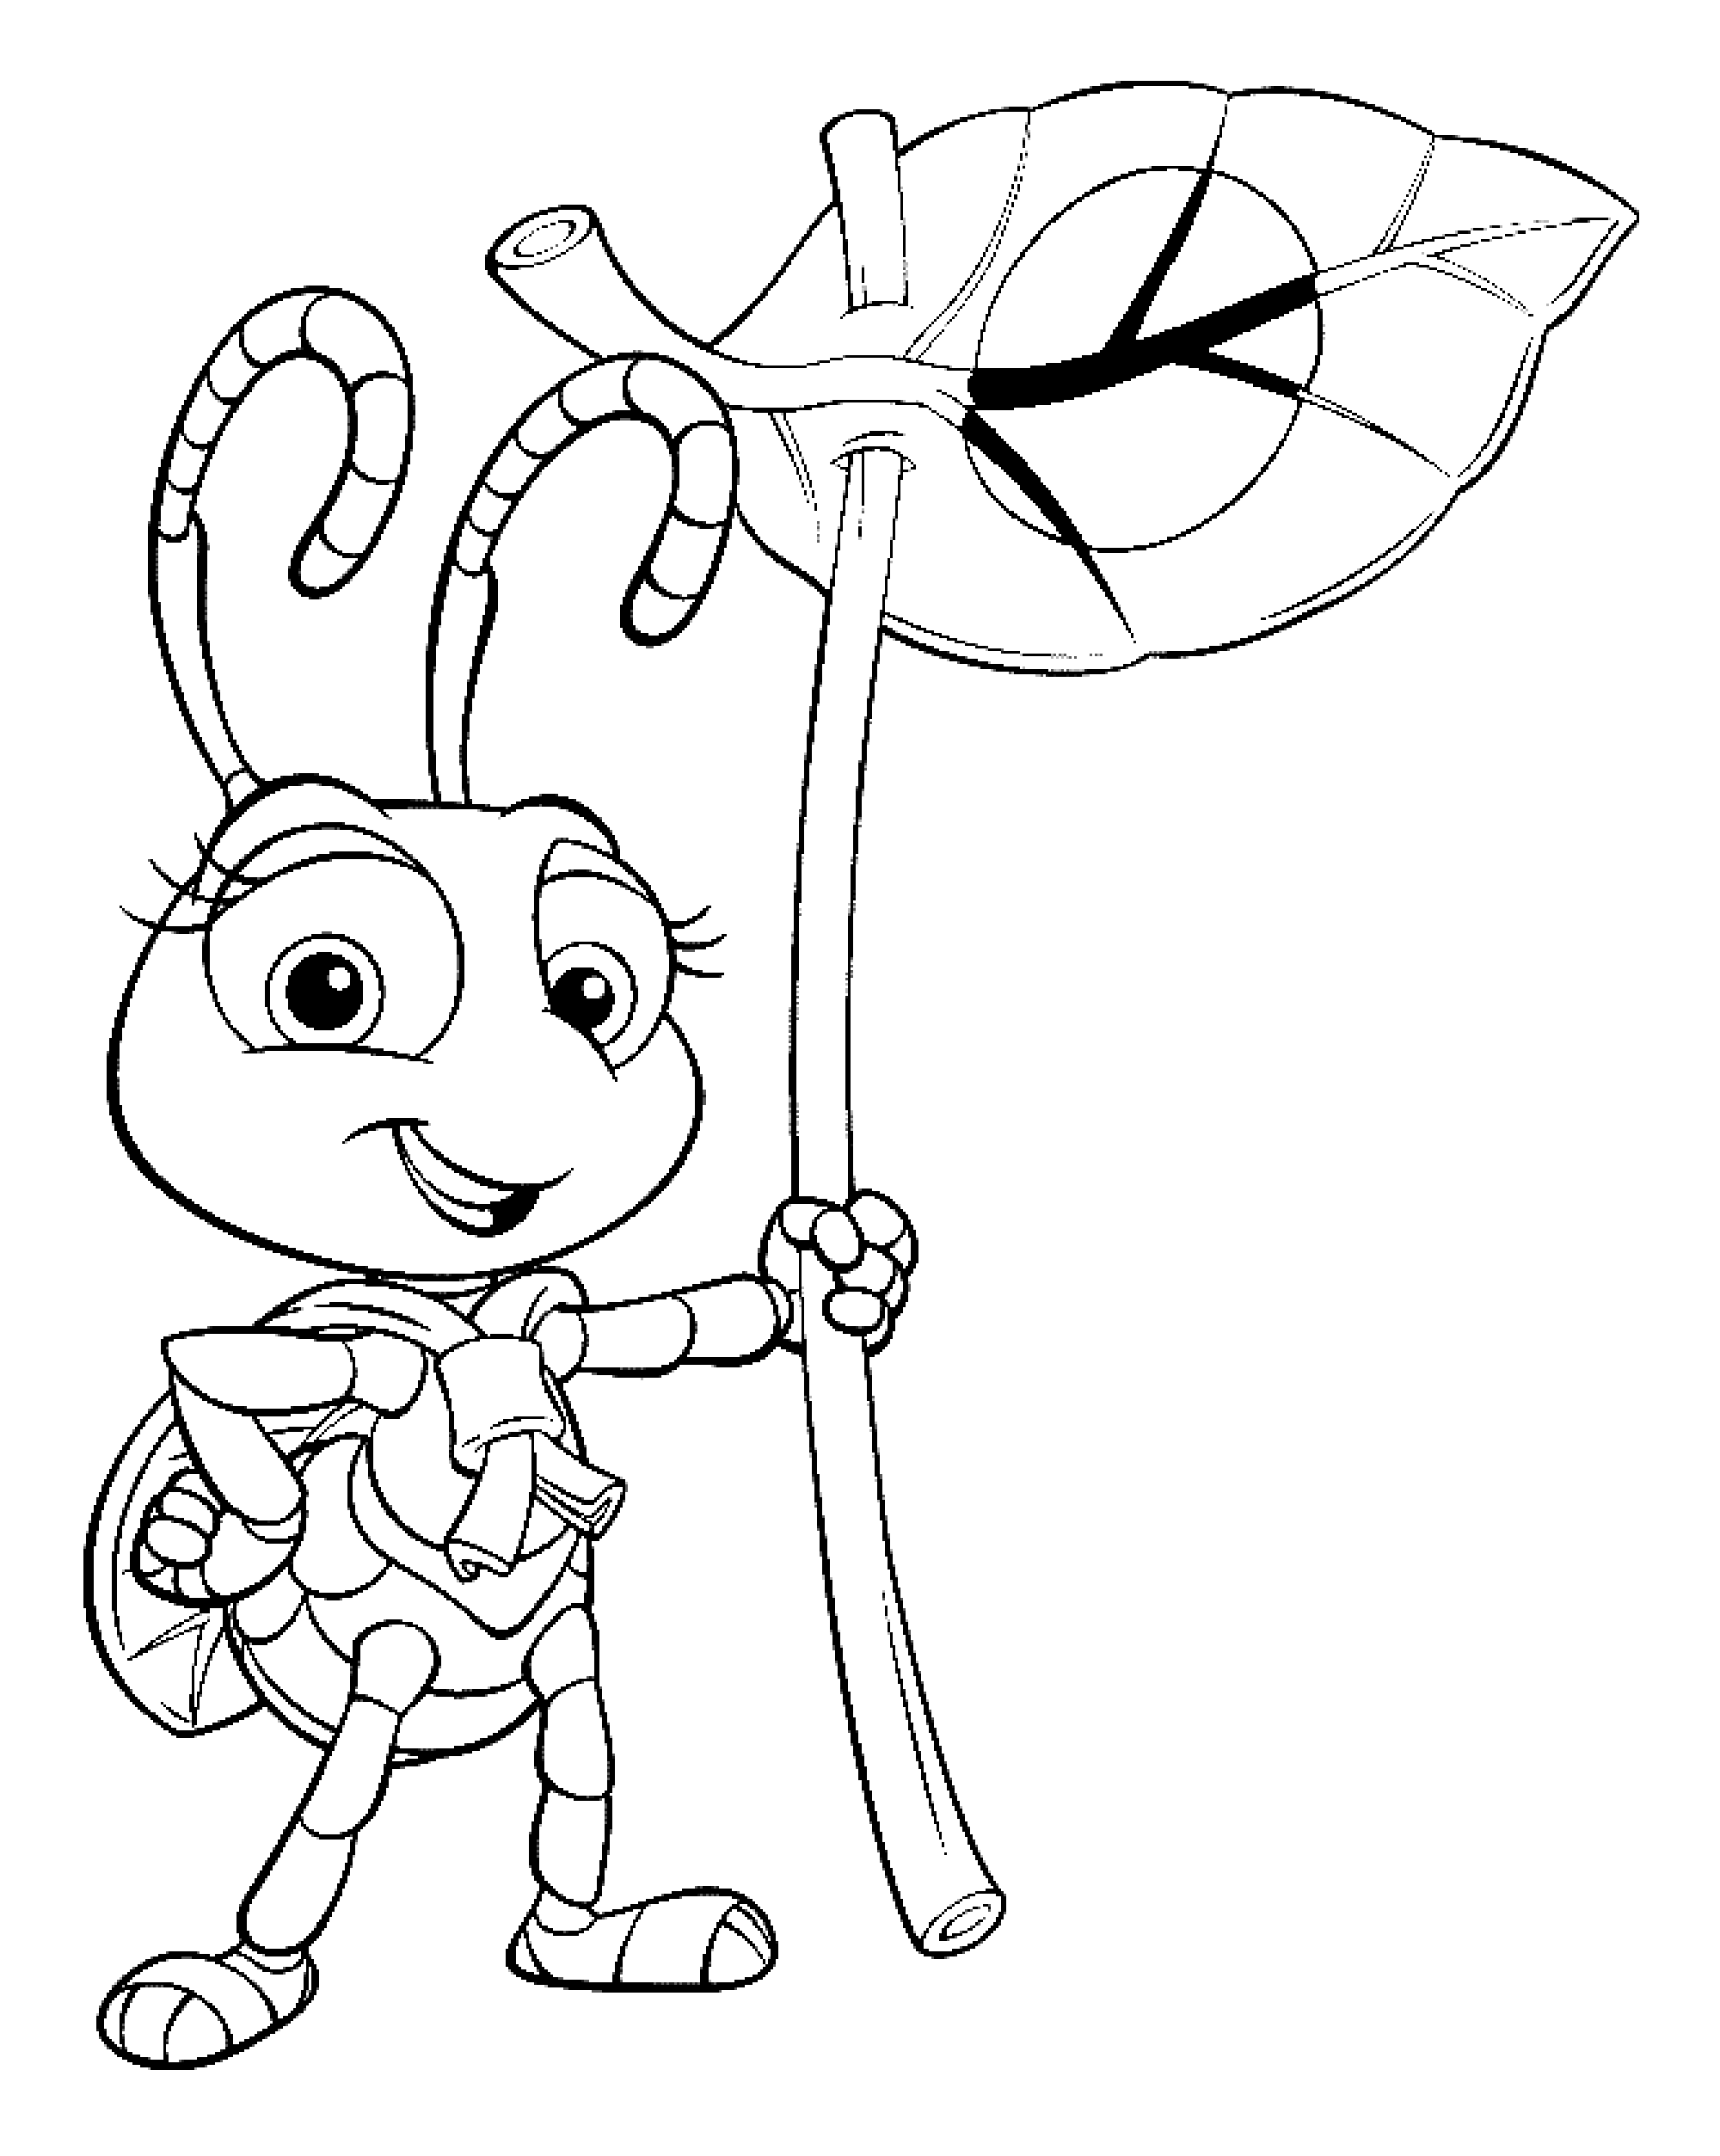 All that's missing is your coloring for this little bug to be ready to go.